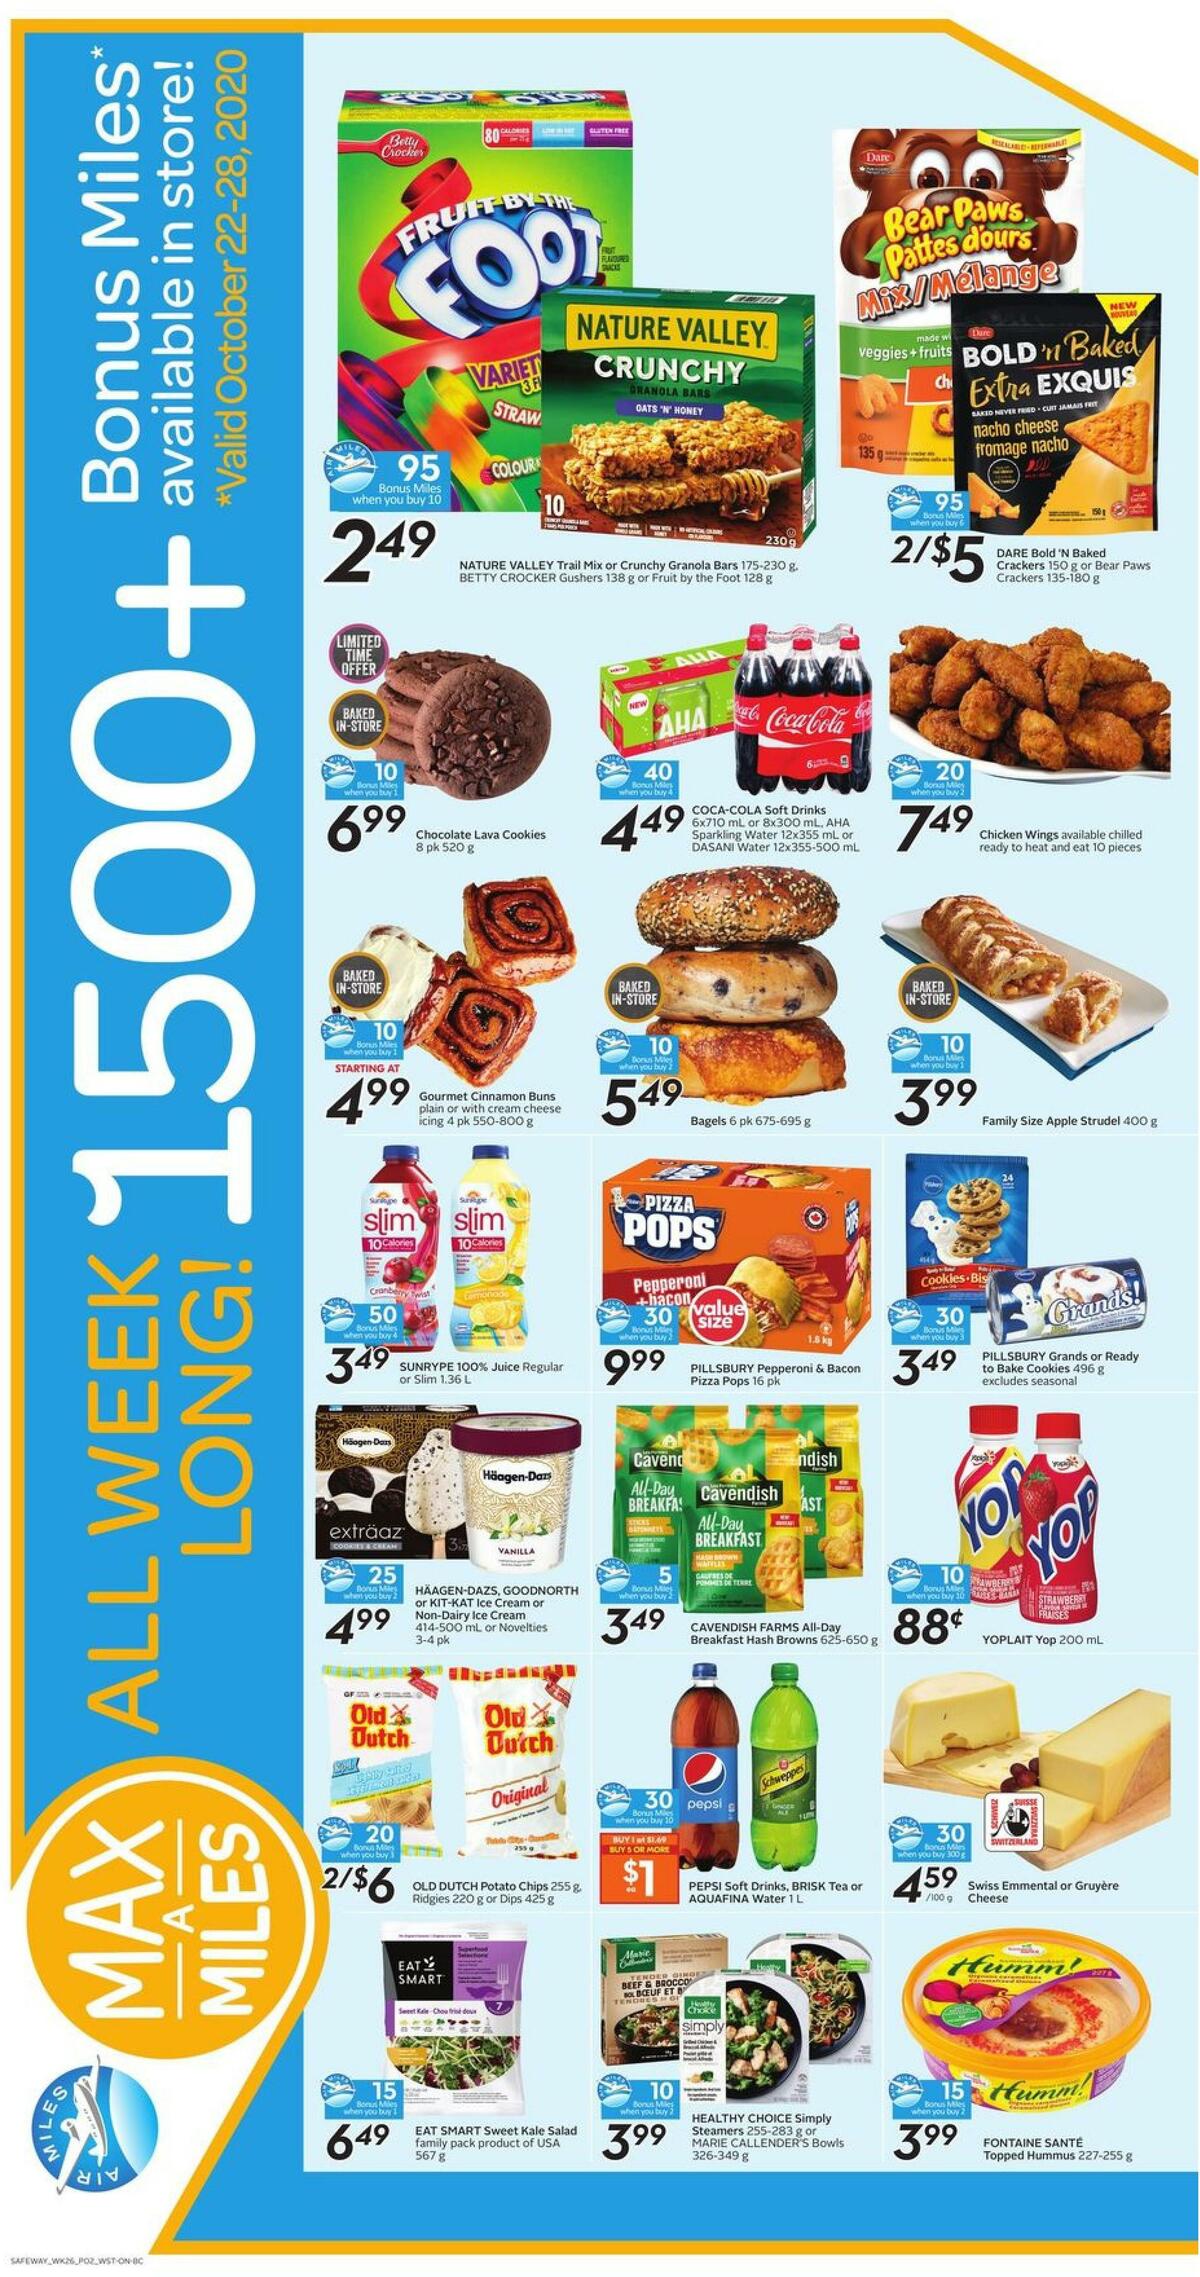 Safeway Flyer from October 22